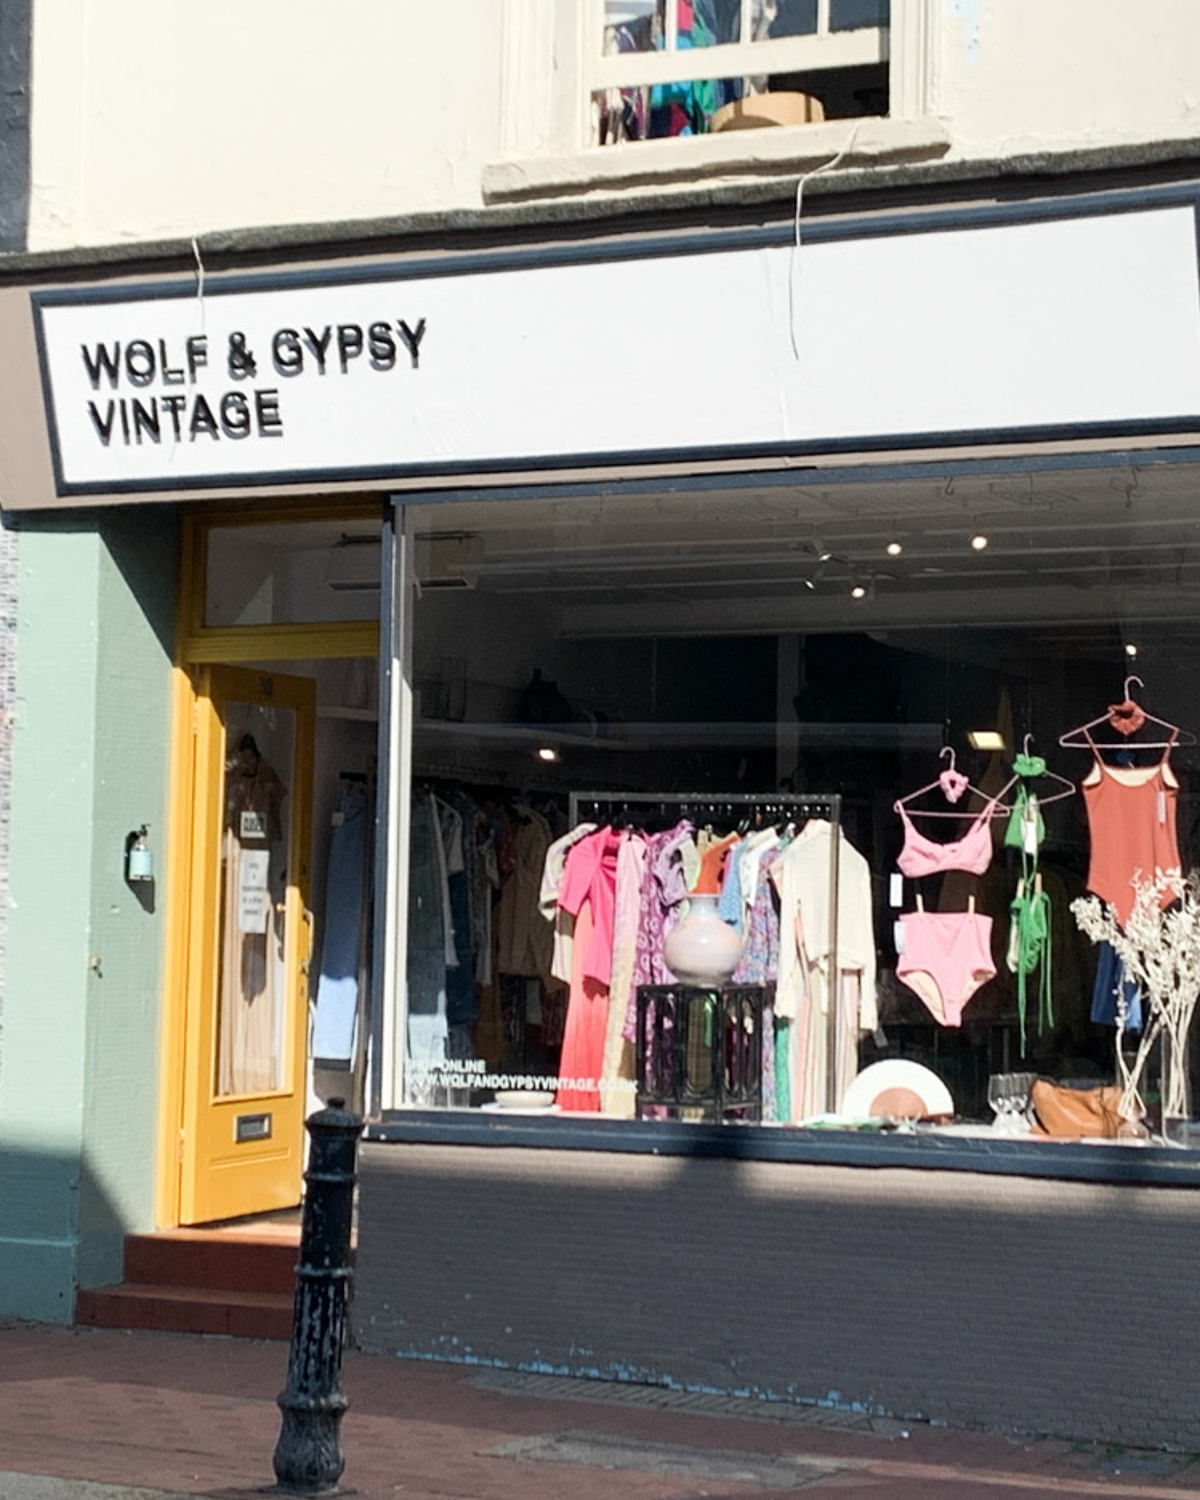 Exterior of Wolf & Gypsy Vintage